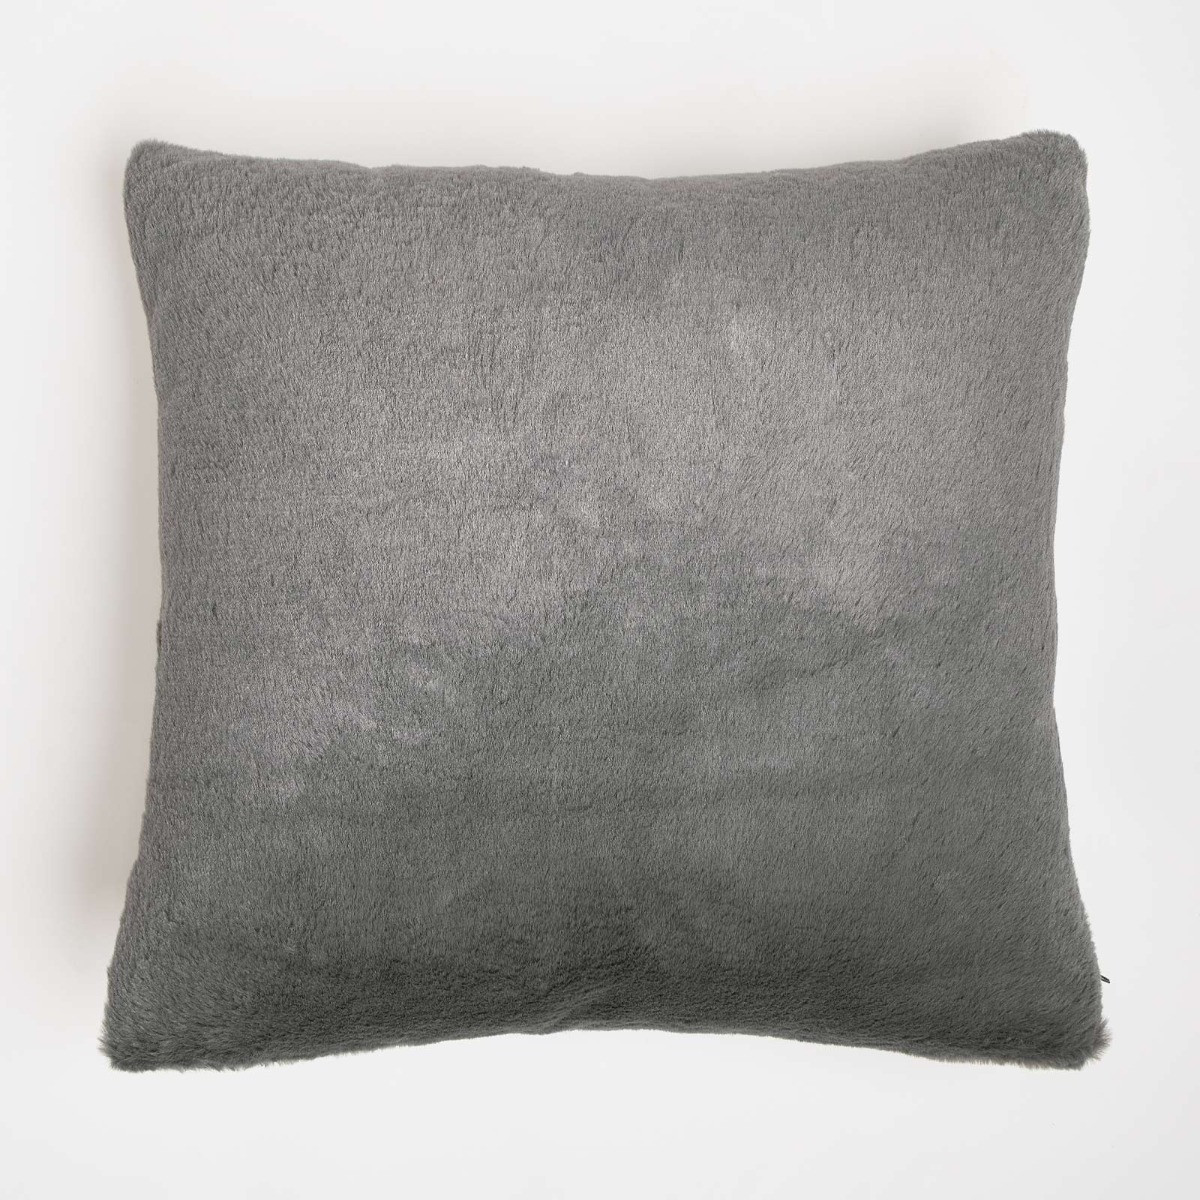 Sienna Faux Fur Set of 4 Cushion Covers - Charcoal>